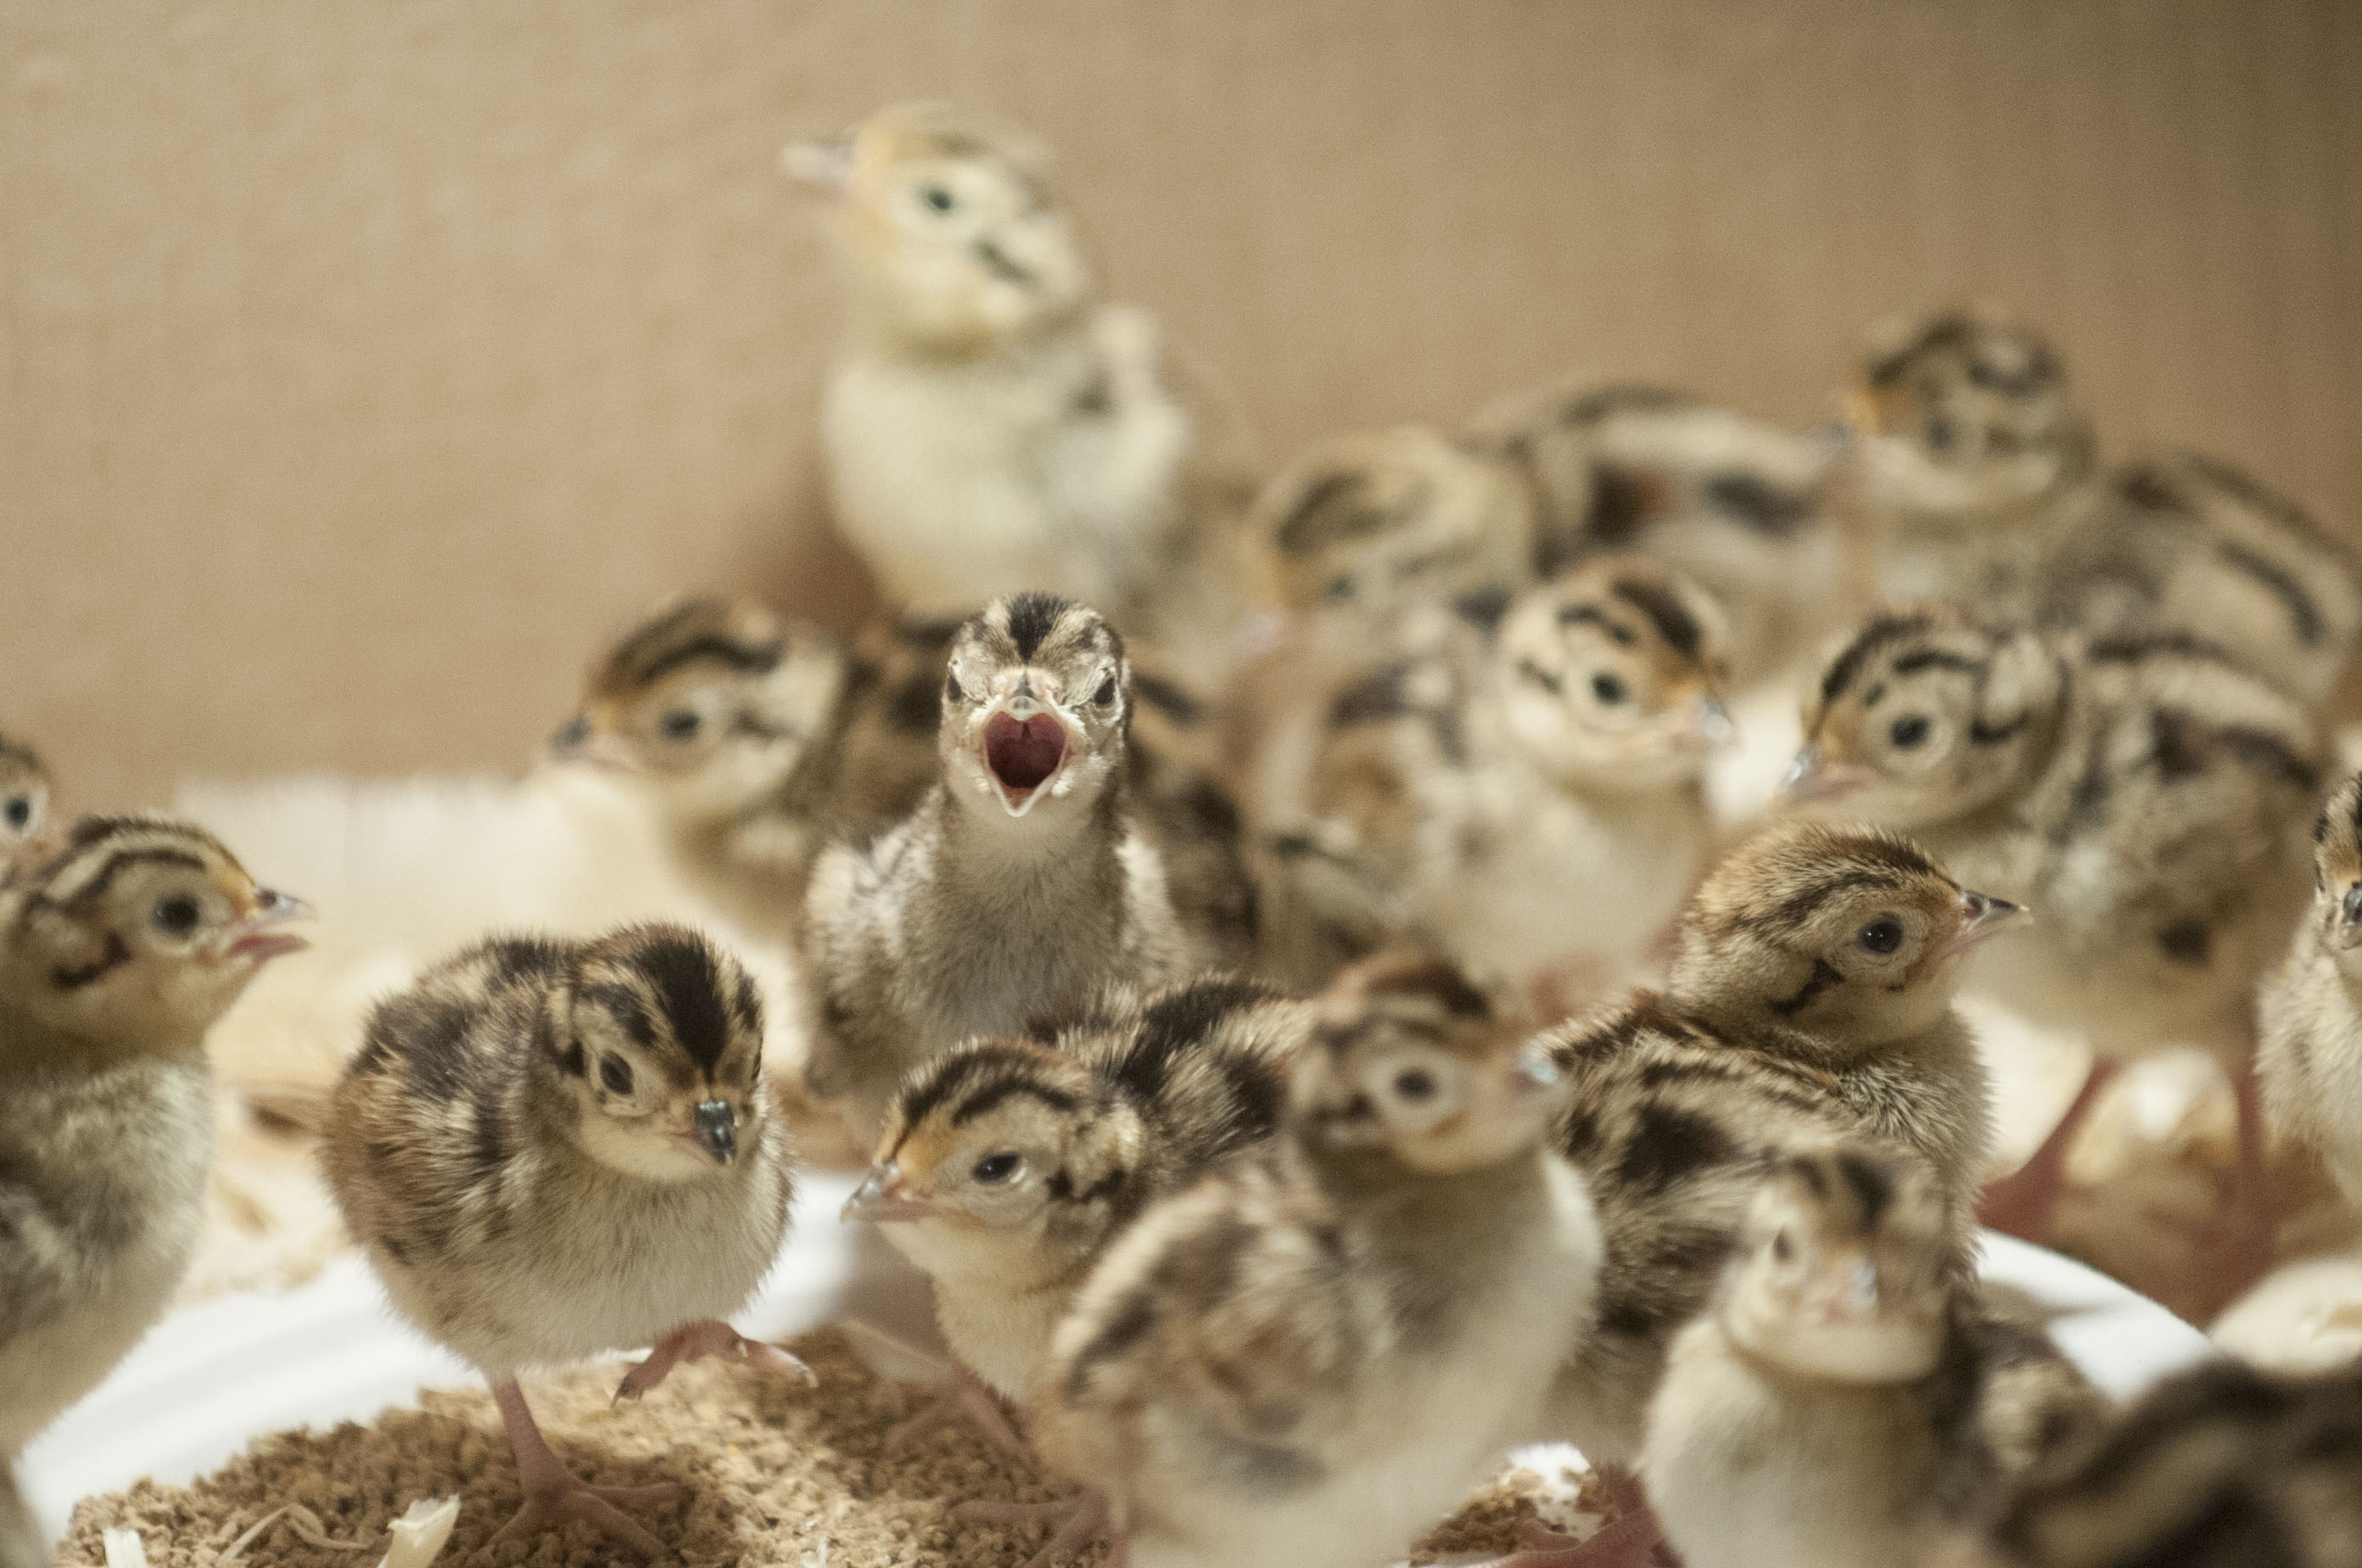 Photo: Raising Pheasants at the Hunting Club in Wisconsin